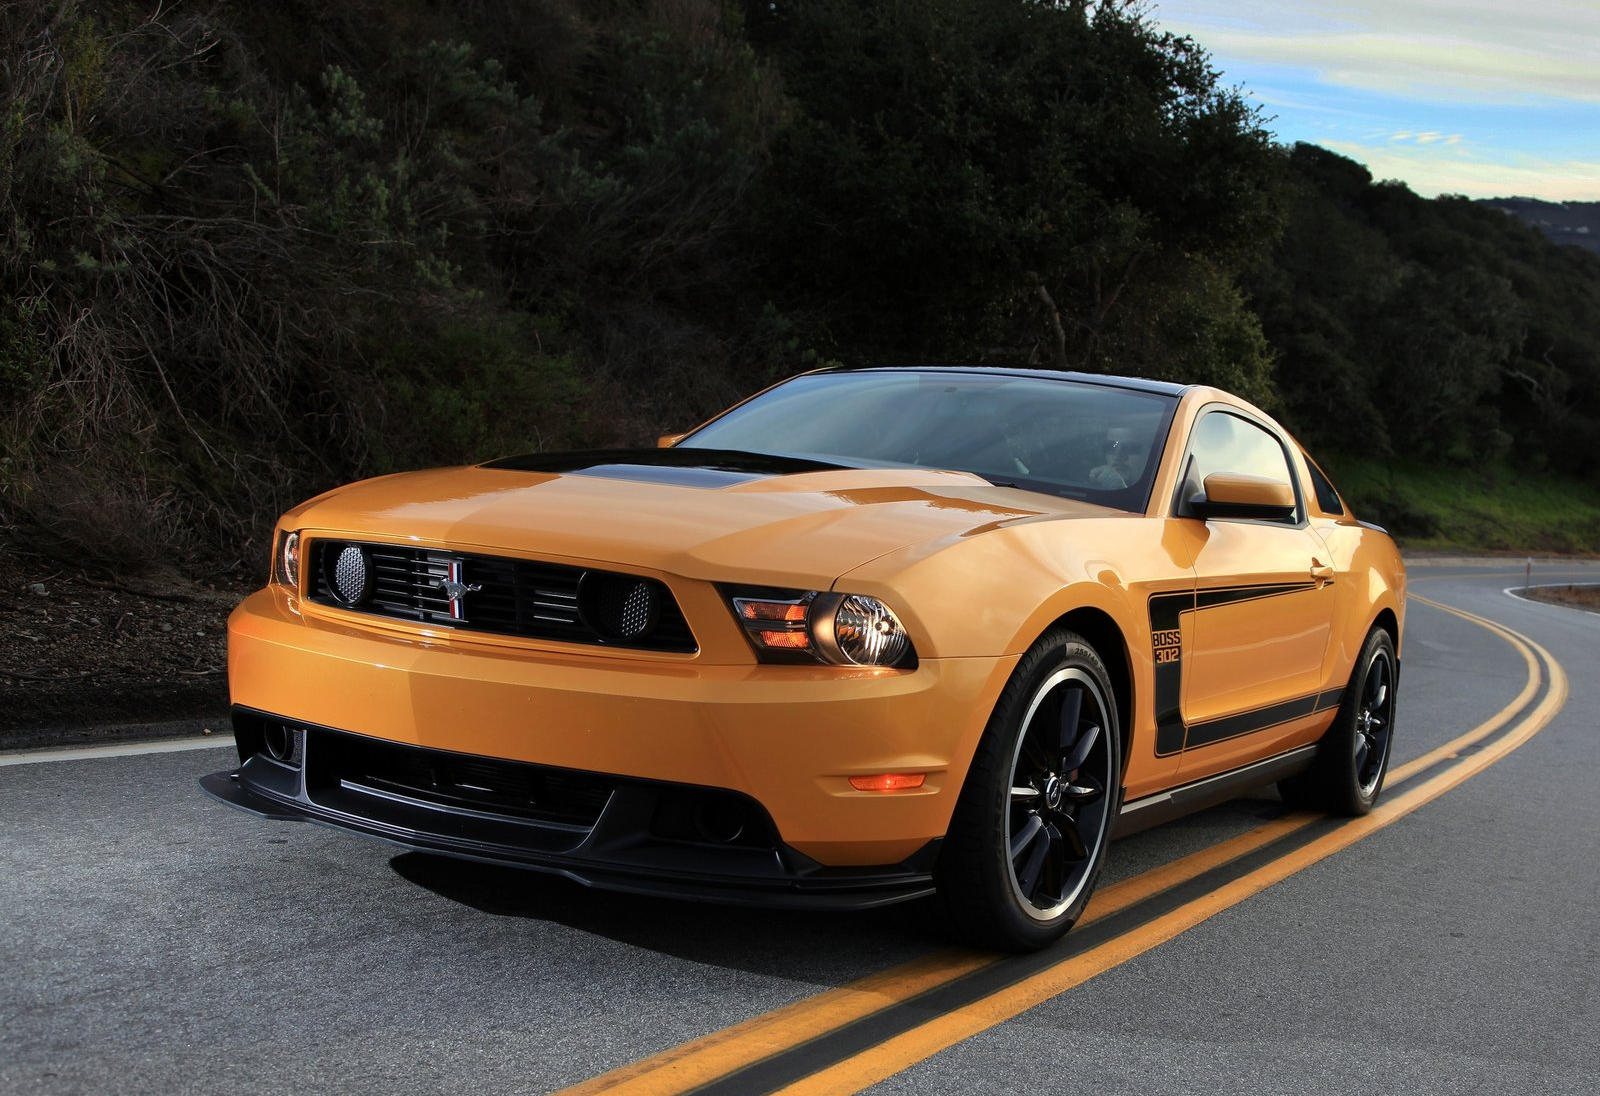 2012 Ford Mustang Boss 302: Review, Trims, Specs, Price, New Interior